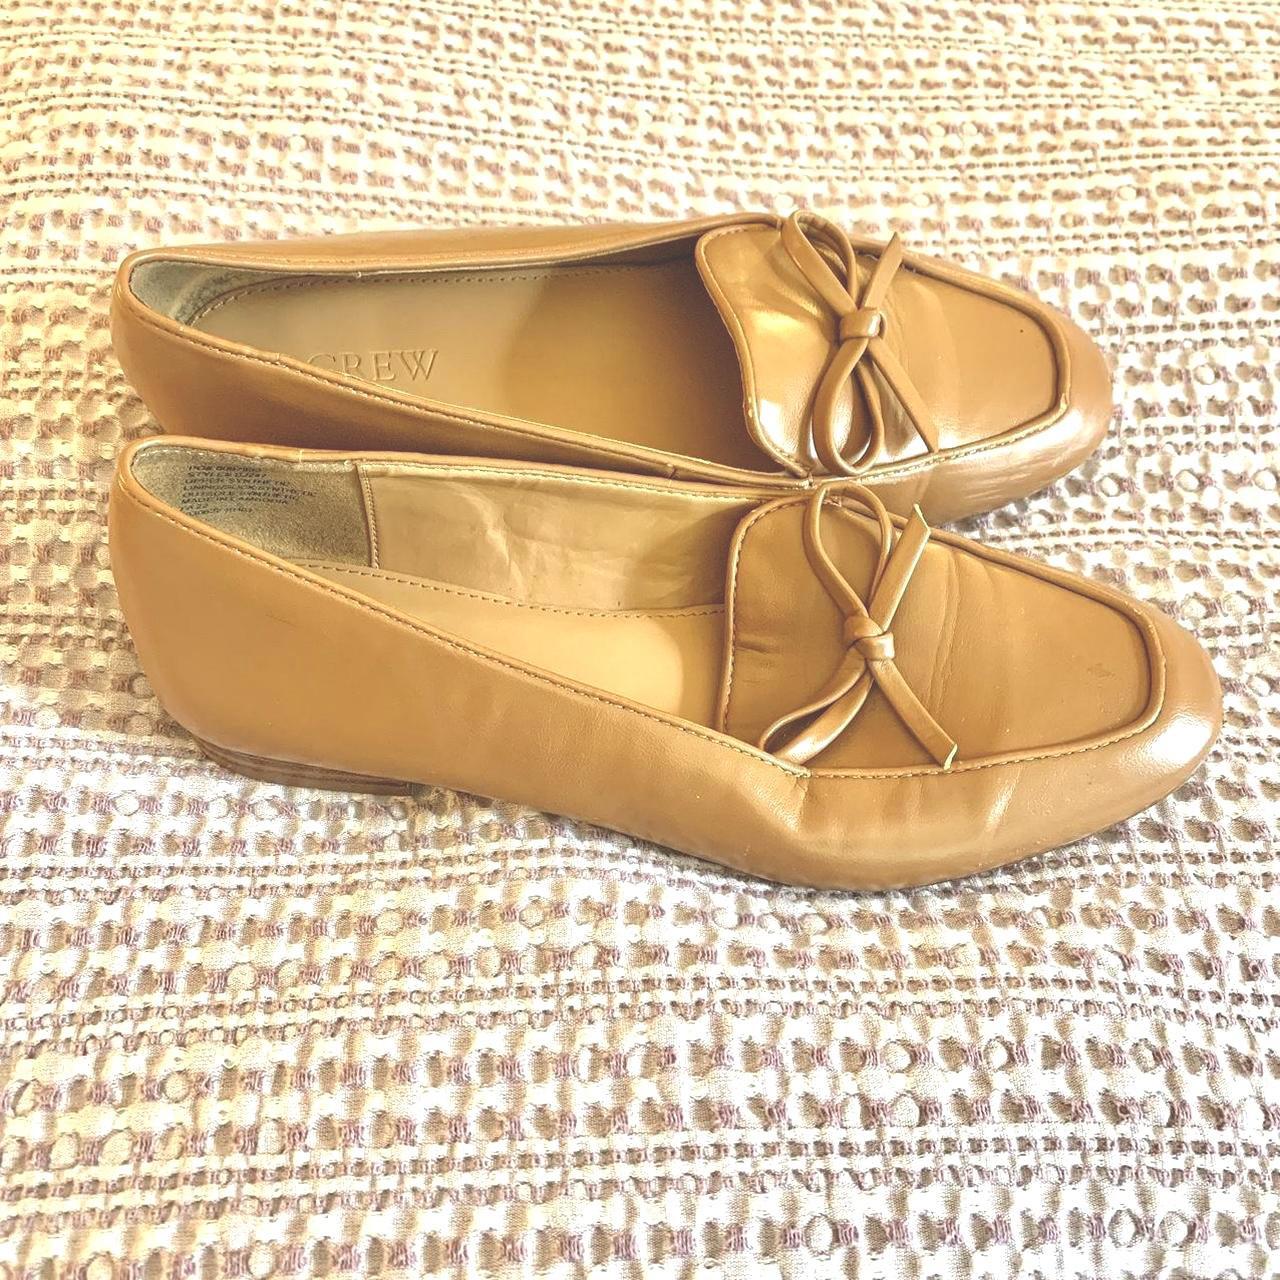 J.Crew Women's Tan and Brown Loafers